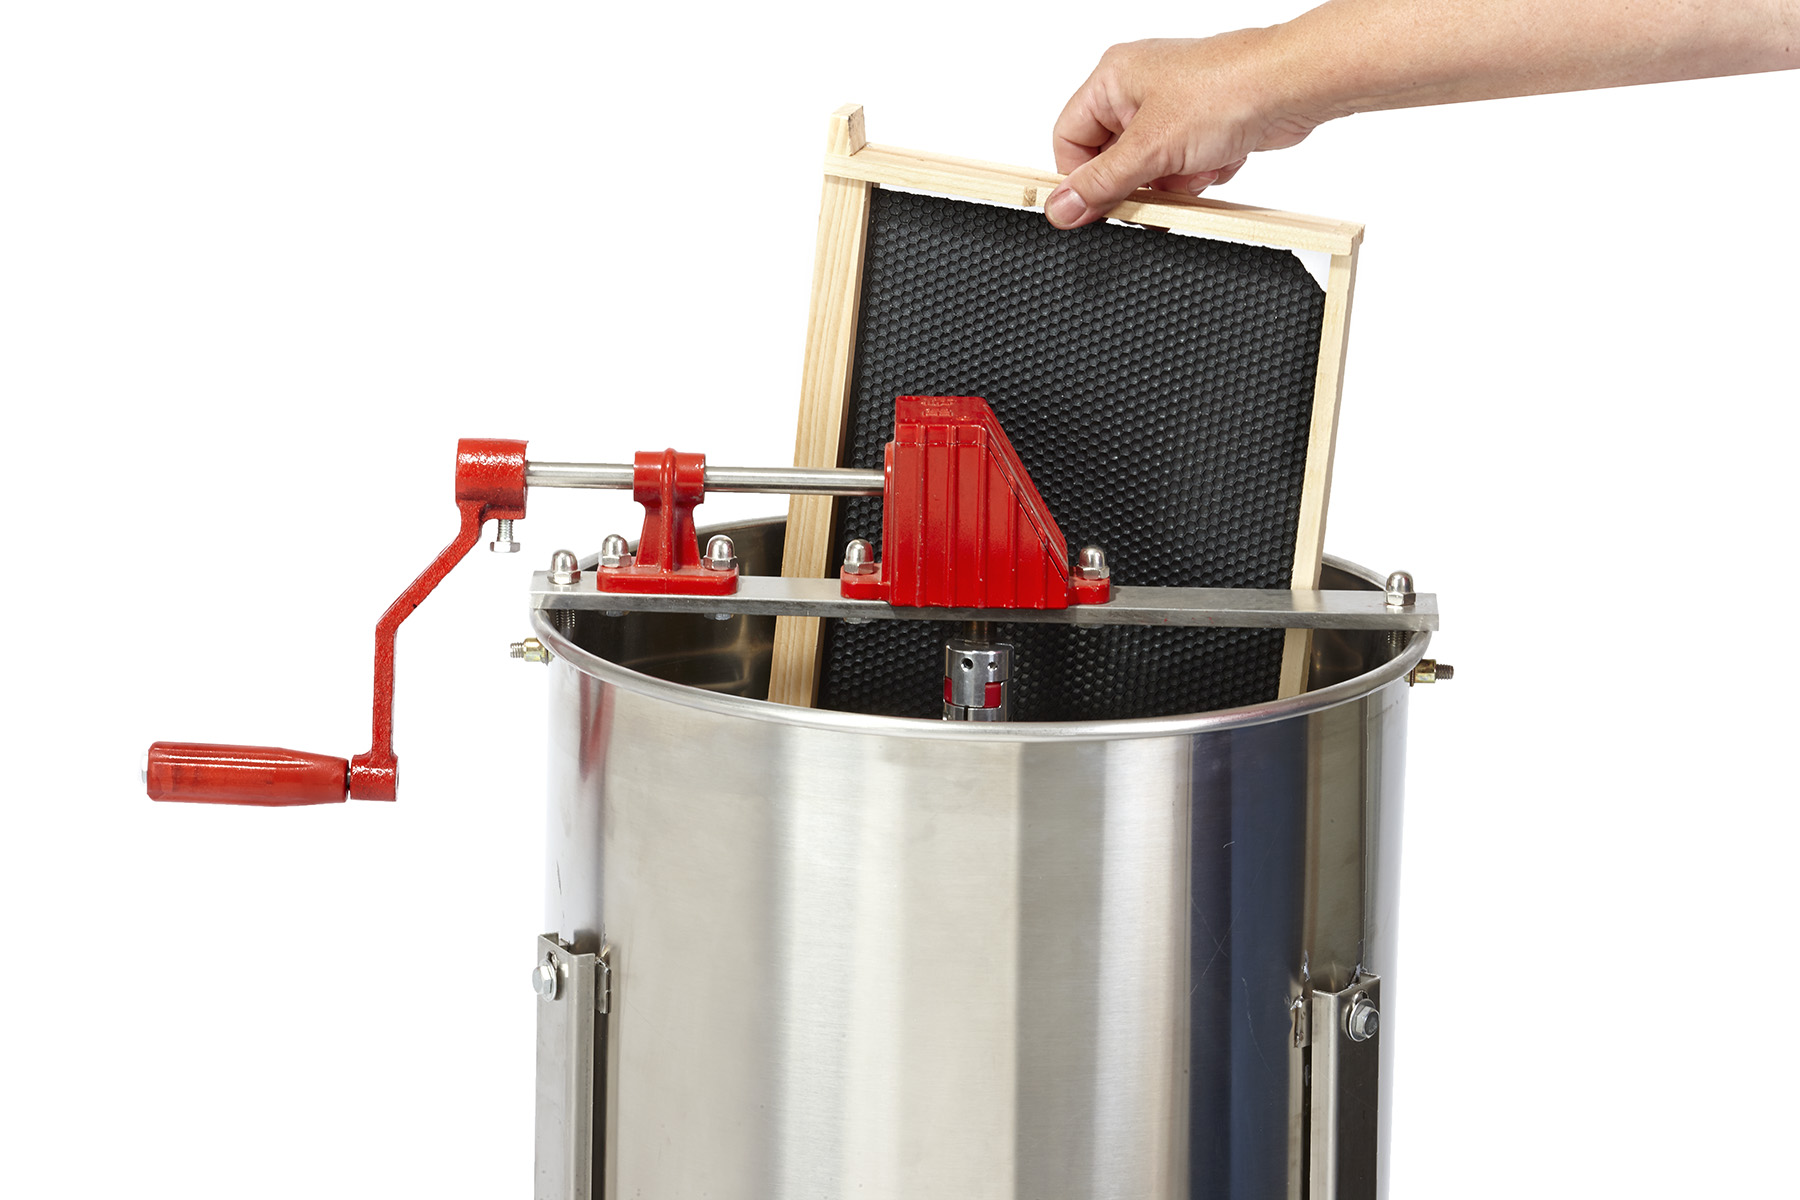 Little Giant Bee Two Frame Stainless Steel Extractor